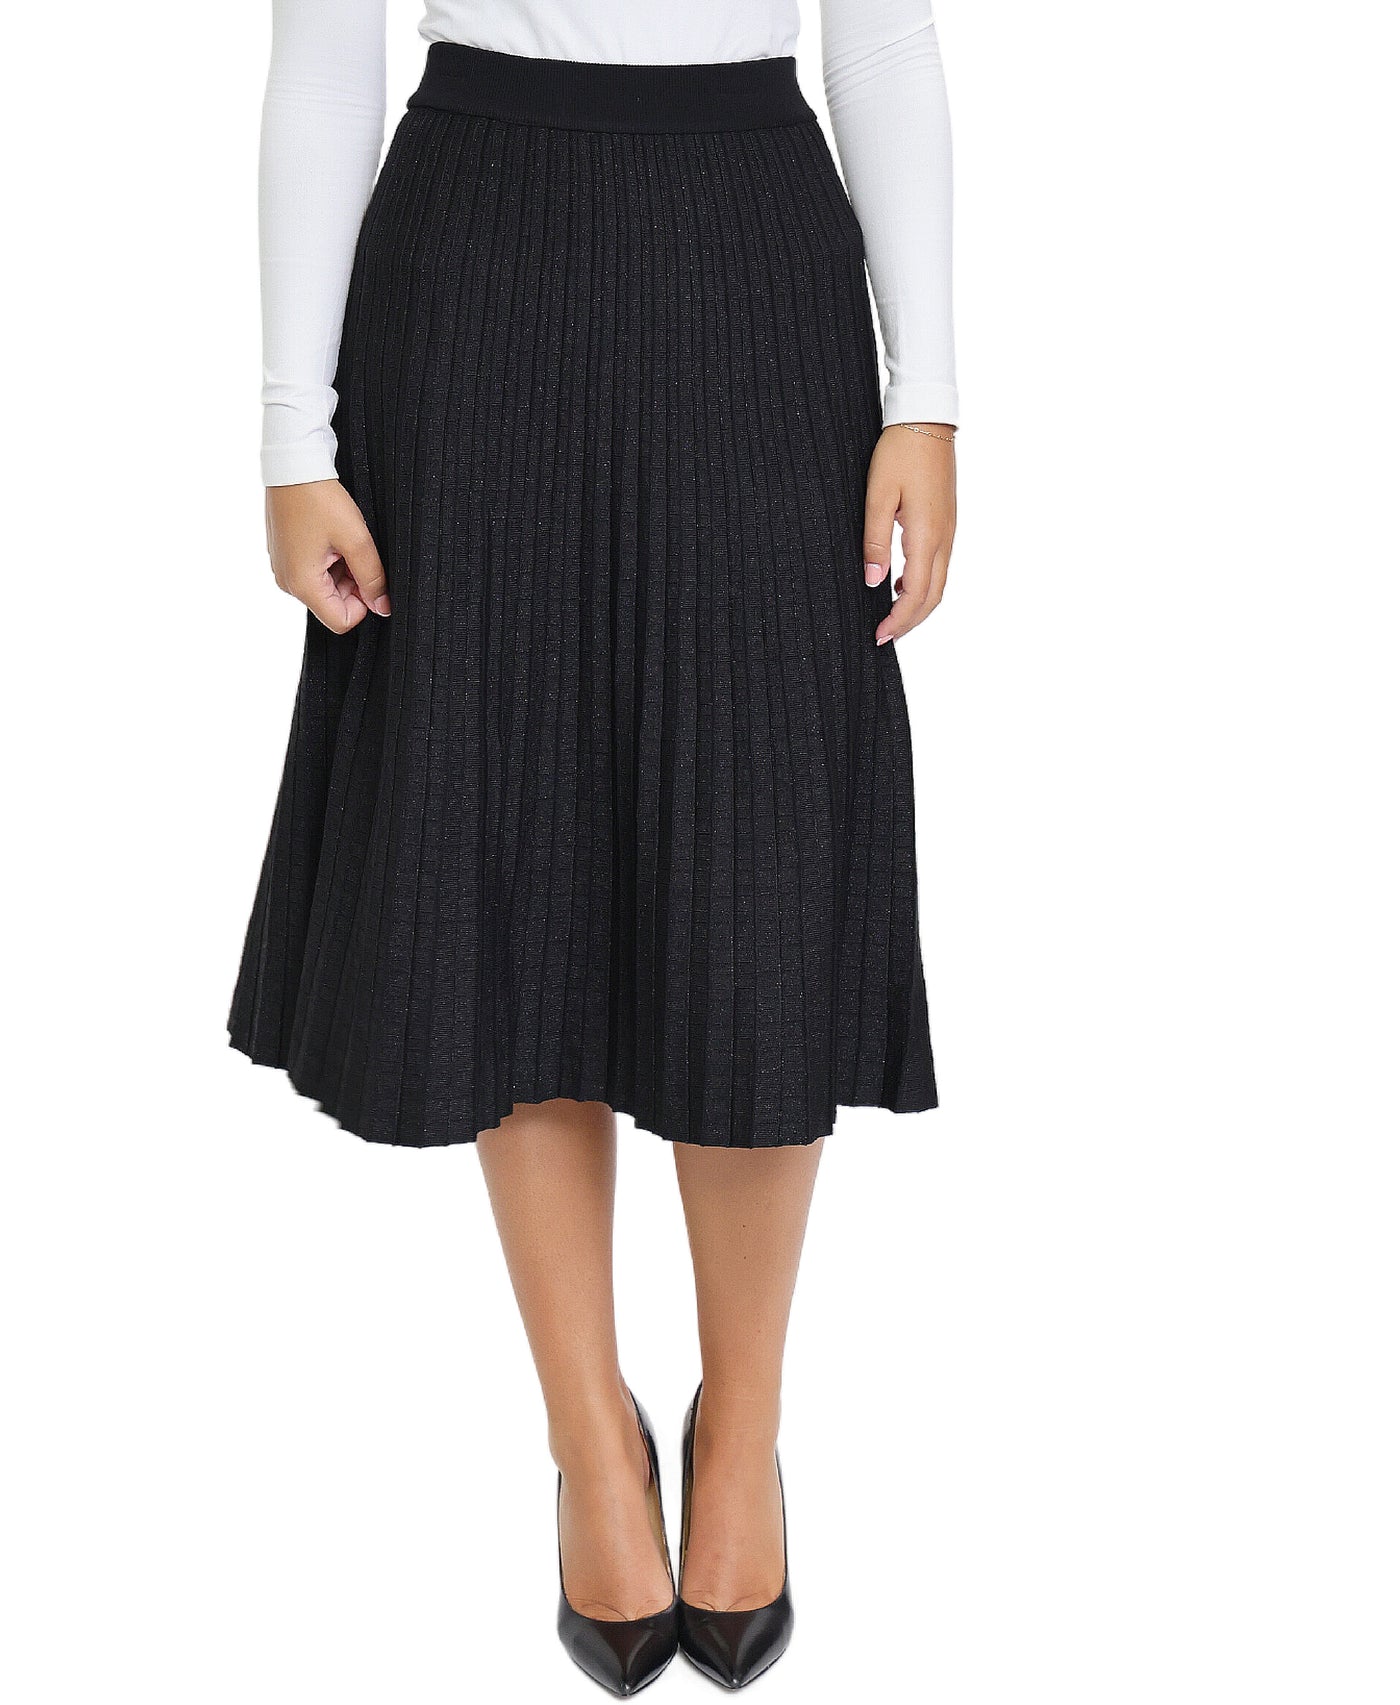 Shimmer Pleated Knit Skirt image 1